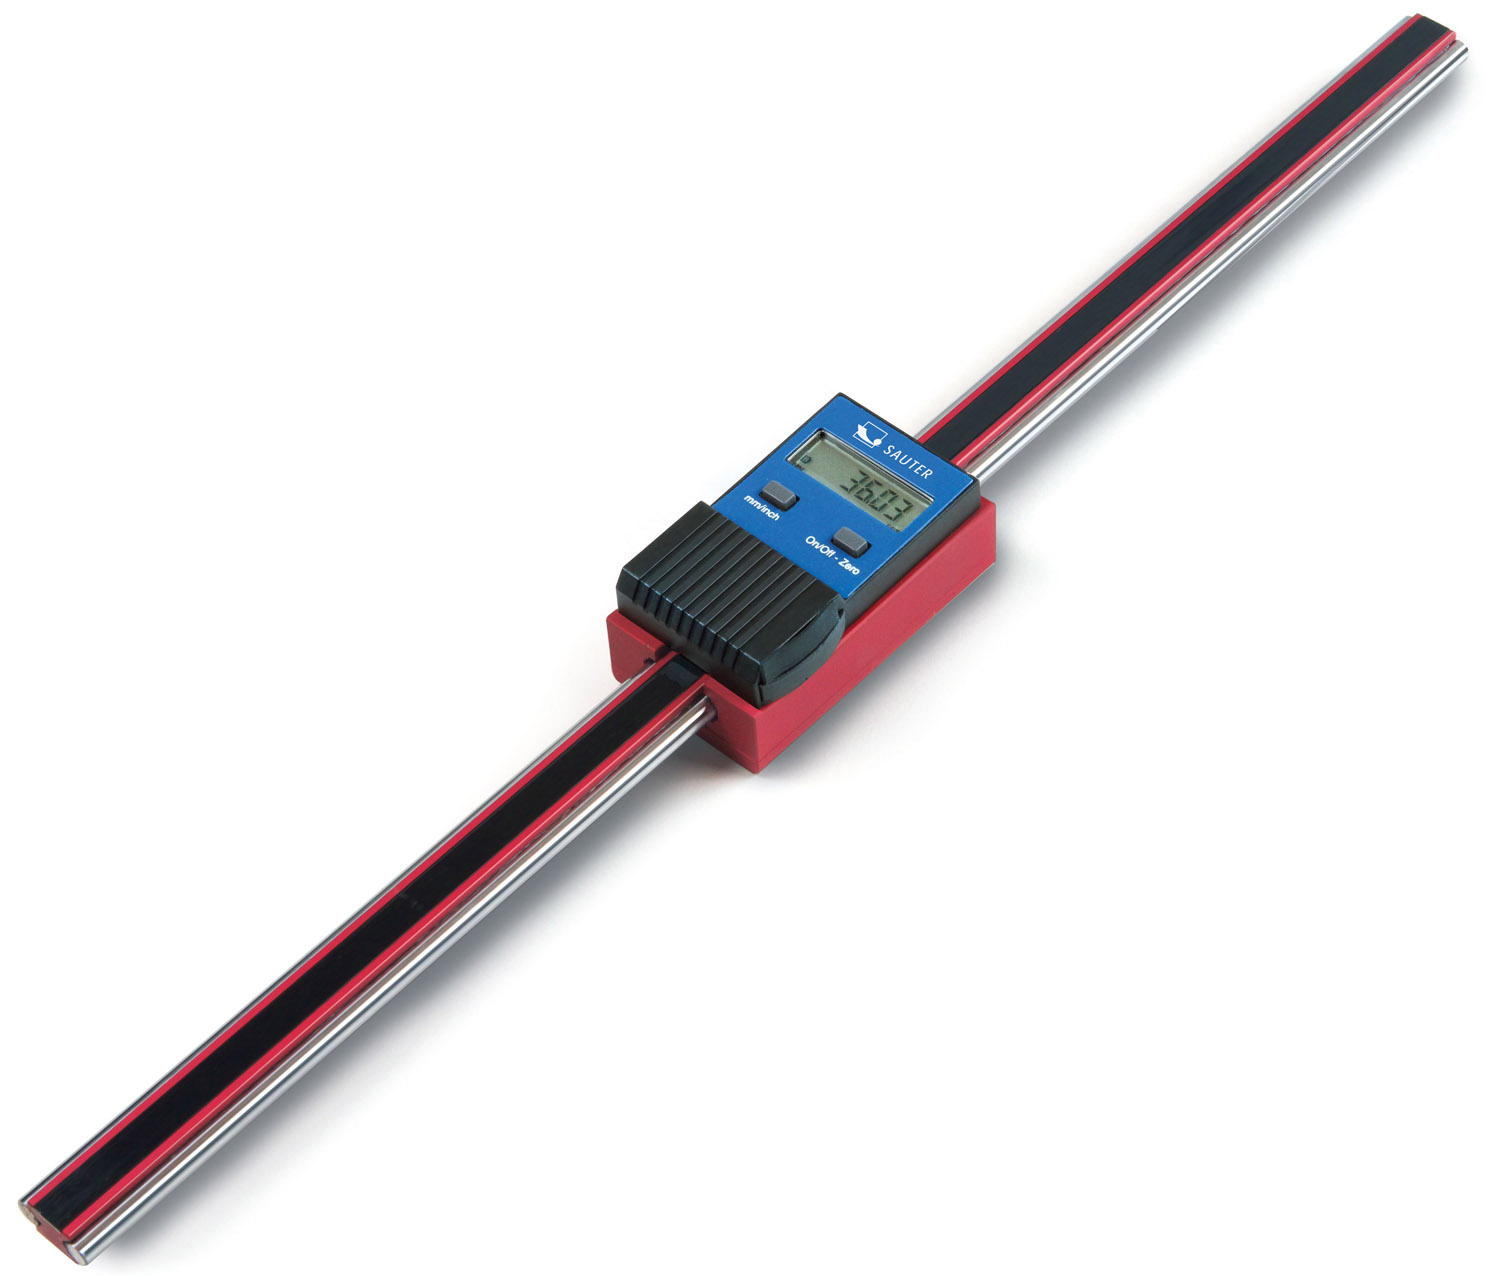 Factory calibration of length measuring devices